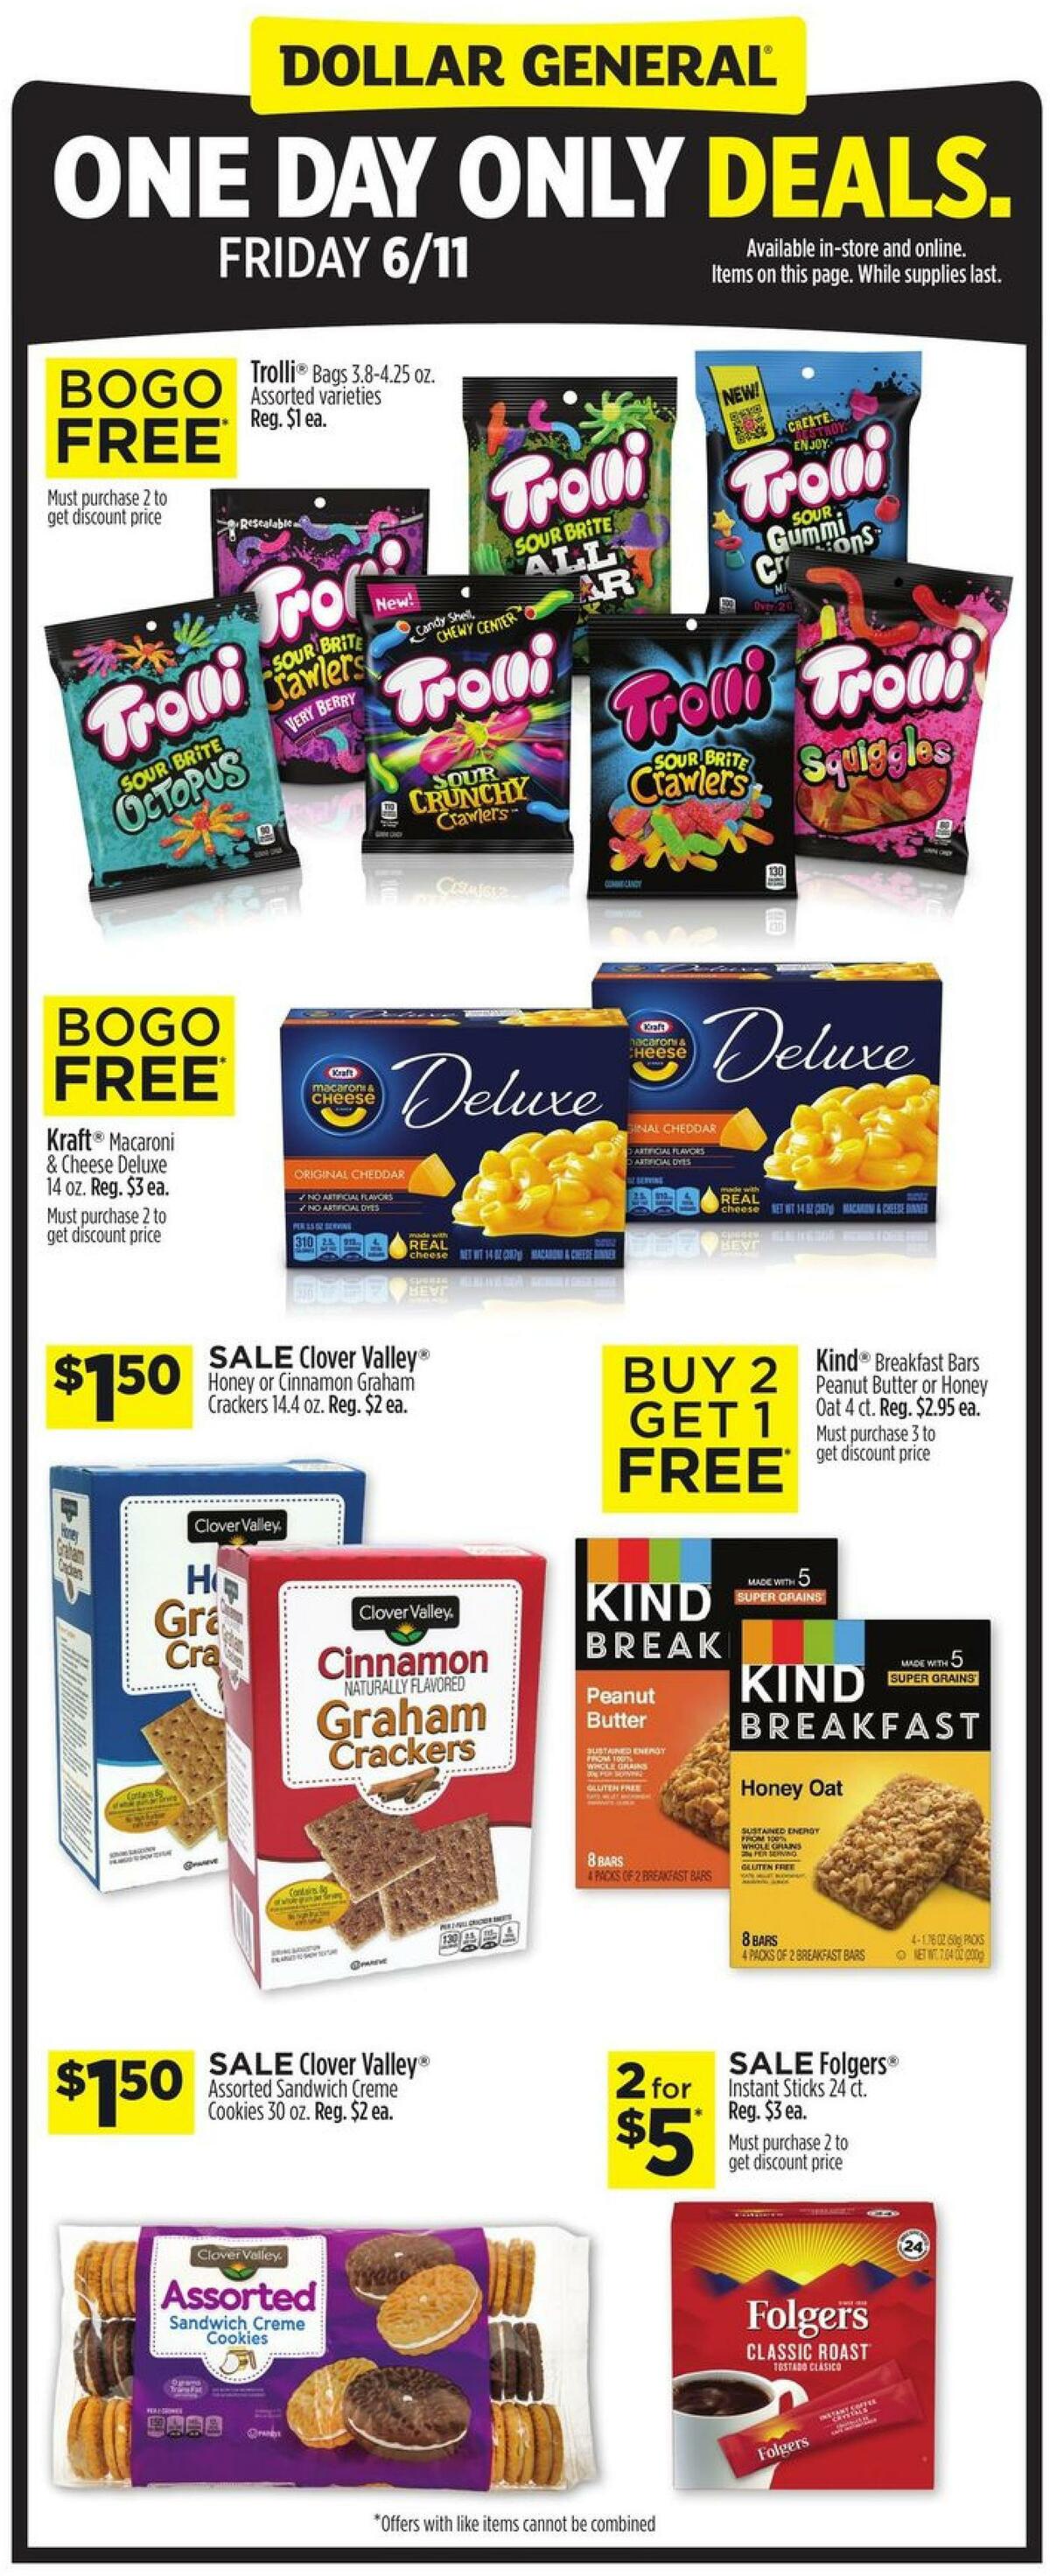 Dollar General One Day Only Deals Weekly Ad from June 11